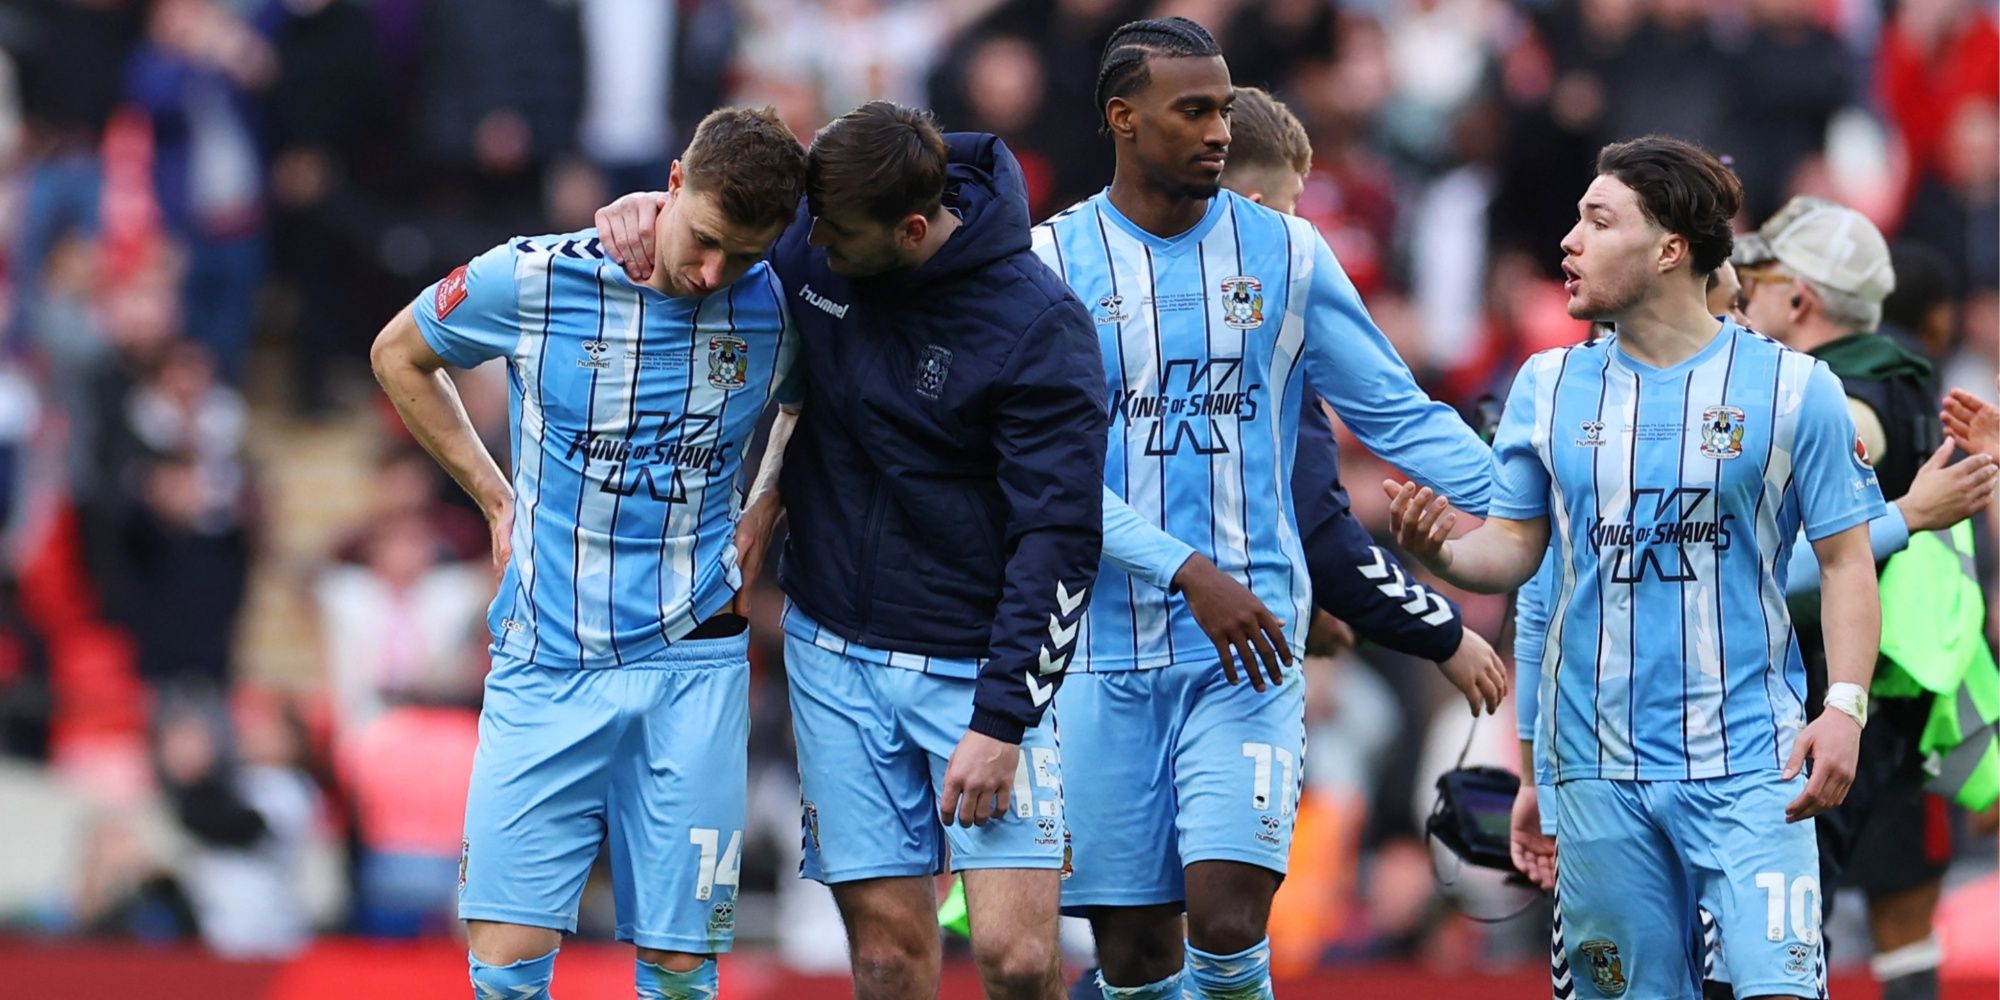 The sadness of Coventry City's players, eliminated on penalties by Manchester United.